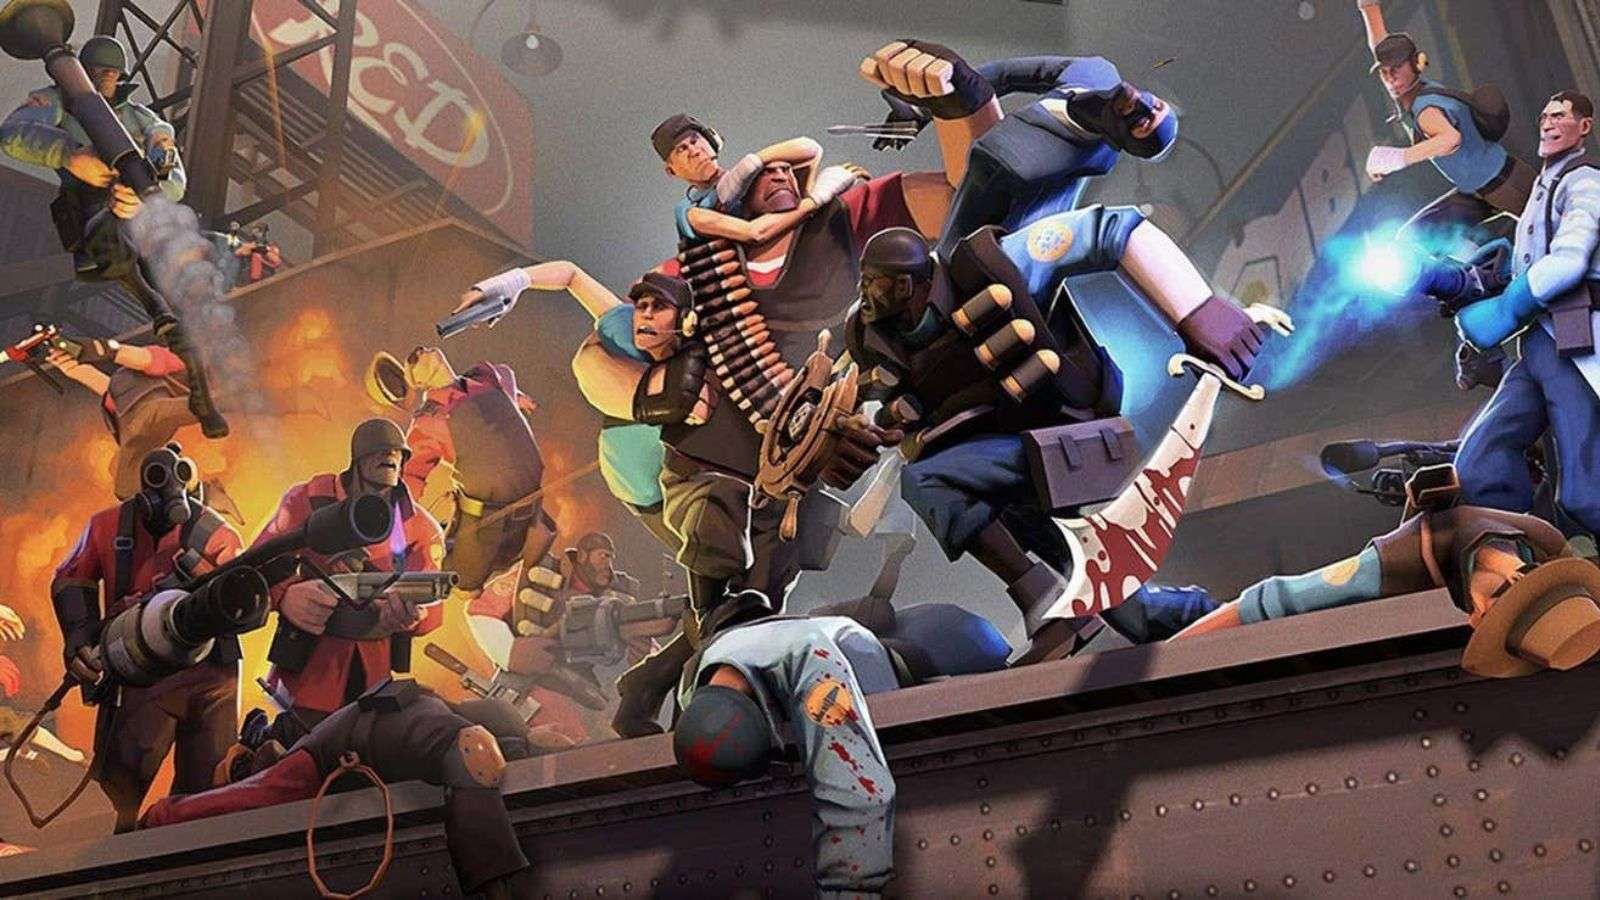 Valve Team Fortress 2 now has 100 player battles